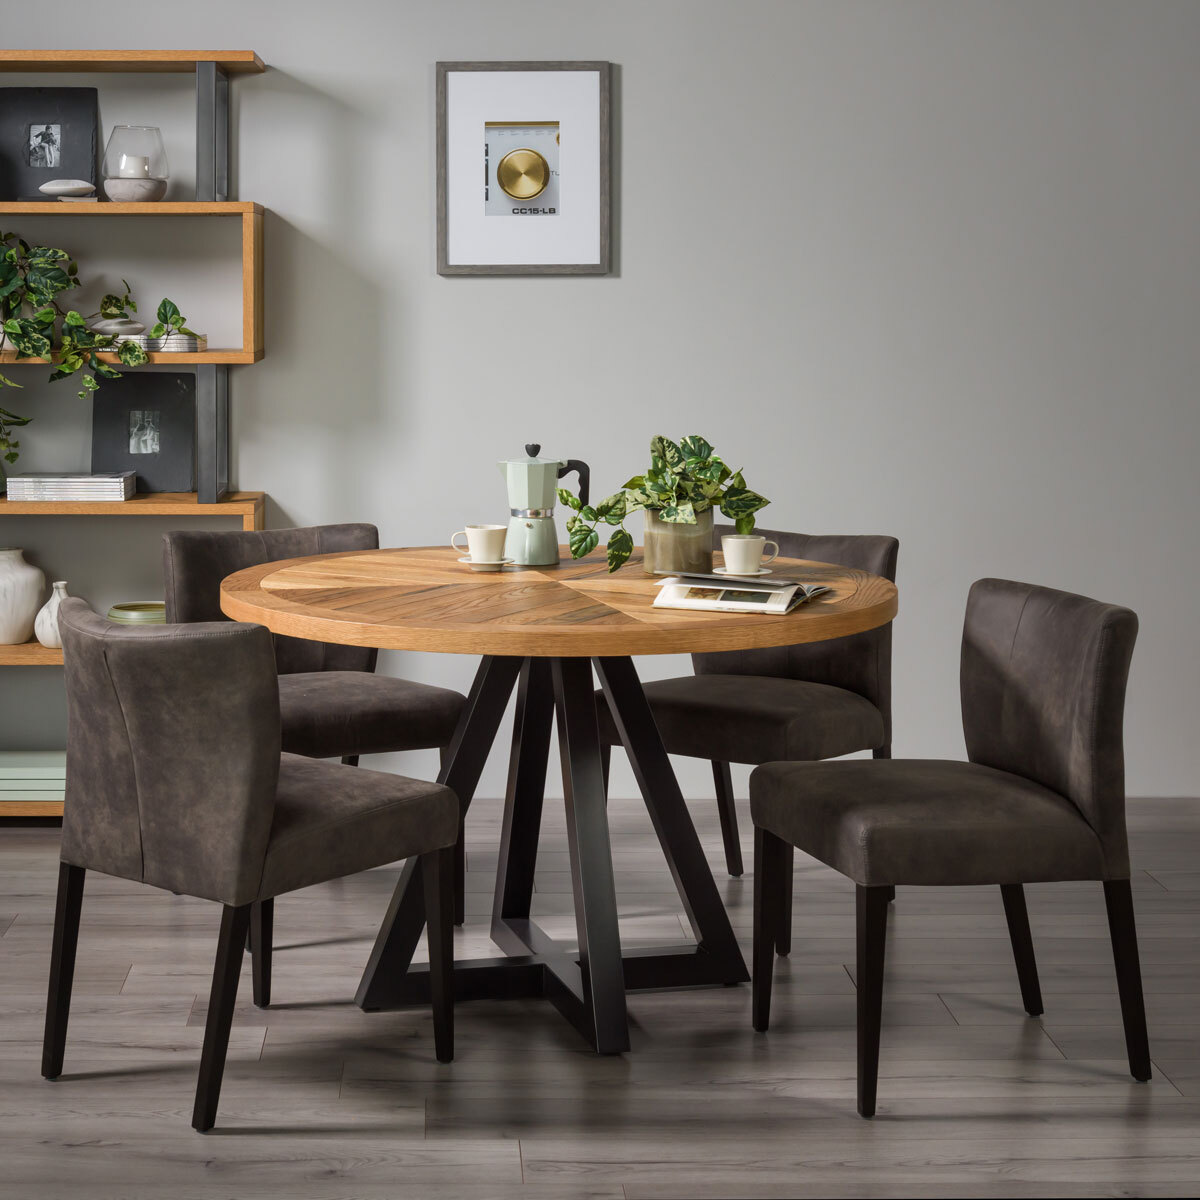 Chevron Rustic Oak Round Dining Table, Circular Dining Table And Chairs Uk